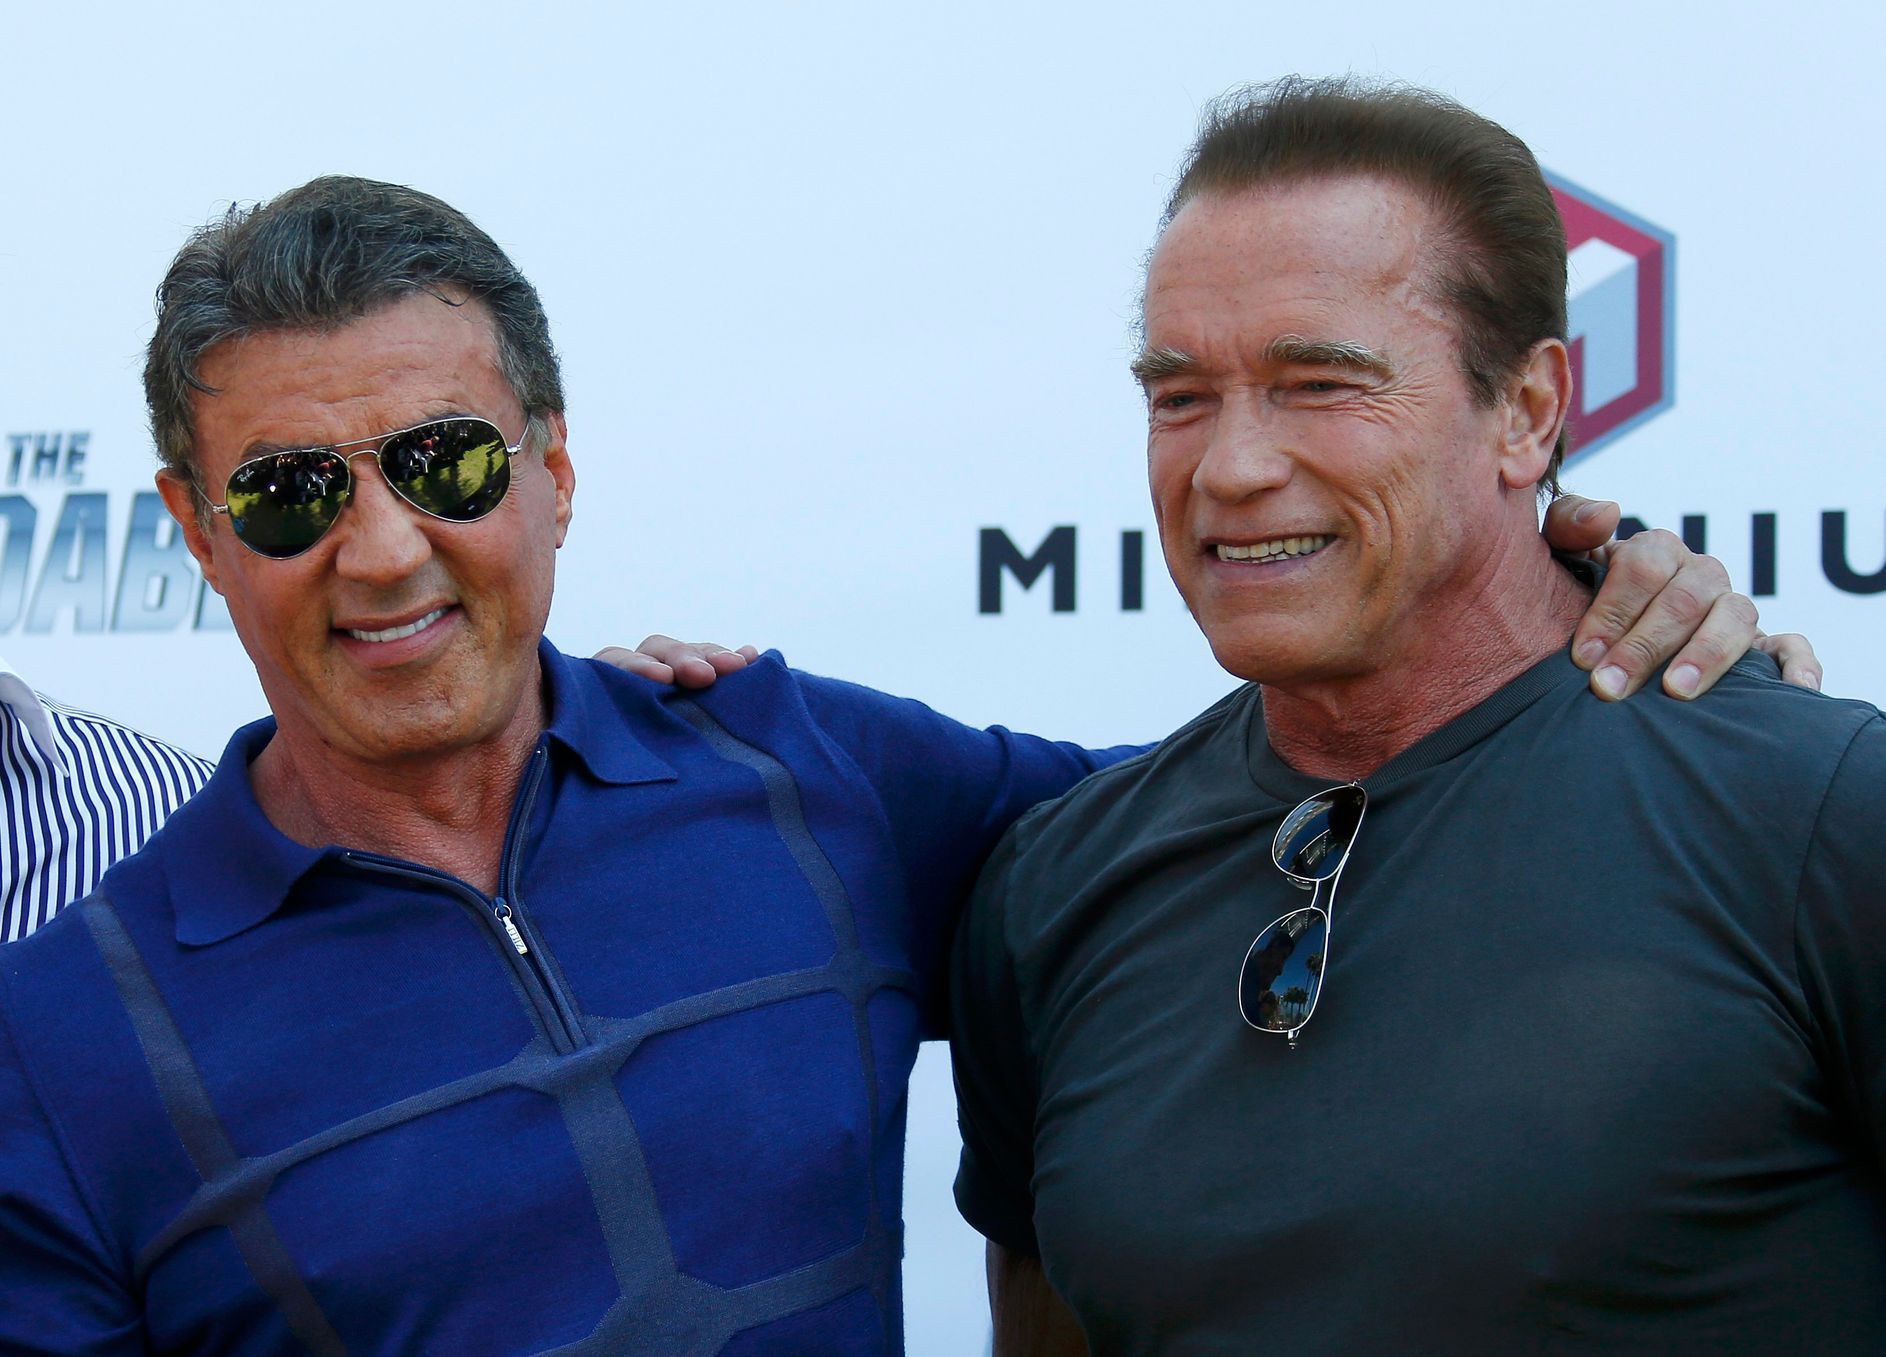 Cast members Sylvester Stallone and Arnold Schwarzenegger pose during a photocall on the Croisette to promote the film &quot;The Expendables 3&quot; during the 67th Cannes Film Festival in Cannes